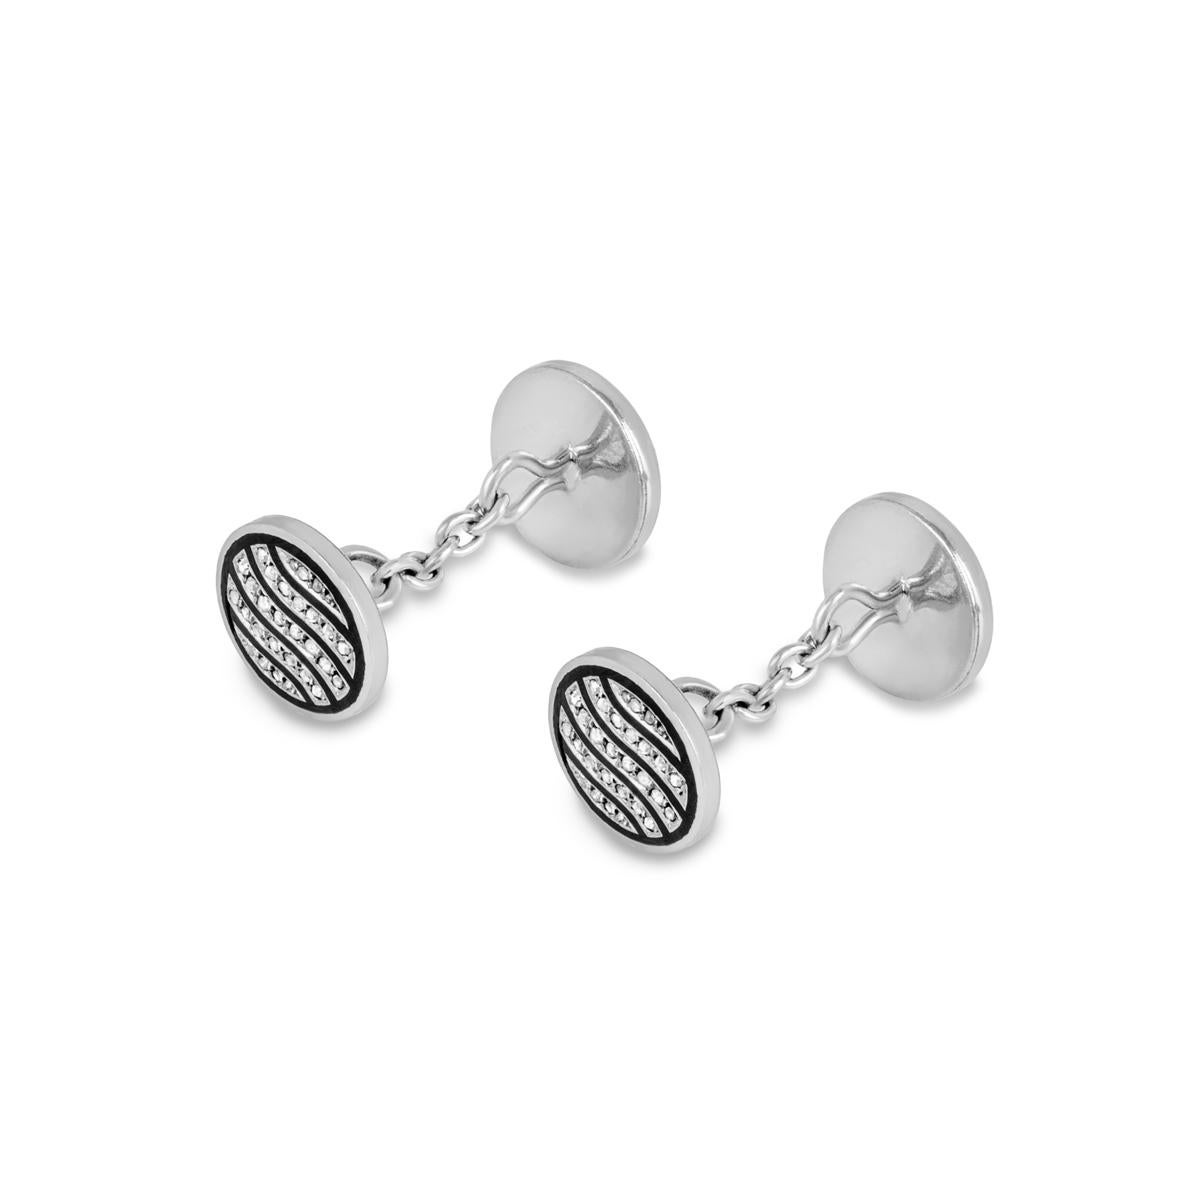 A pair of 18k white gold diamond and enamel inlay cufflinks. The cufflinks are composed of a circular motif featuring a black enamel inlay, each pave set with 30 free form diamonds set within four intersections. The cufflinks are completed with a